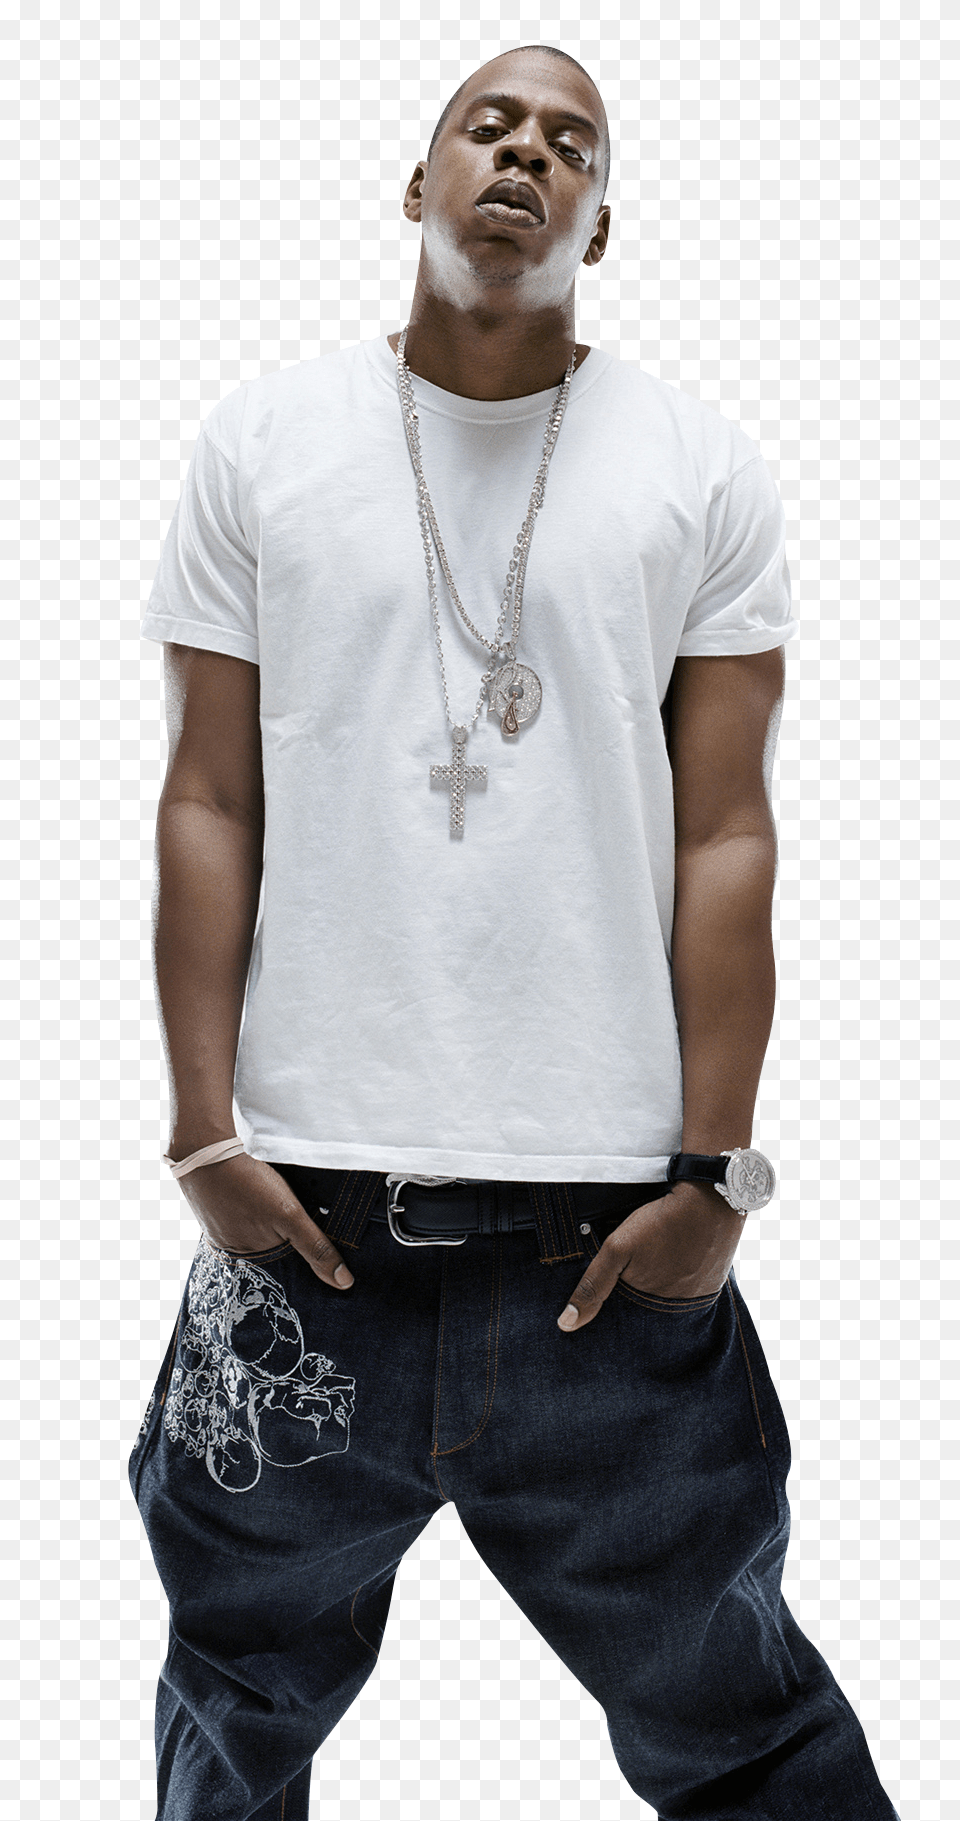 Pngpix Com Jay Z Transparent Image, Accessories, T-shirt, Clothing, Jewelry Free Png